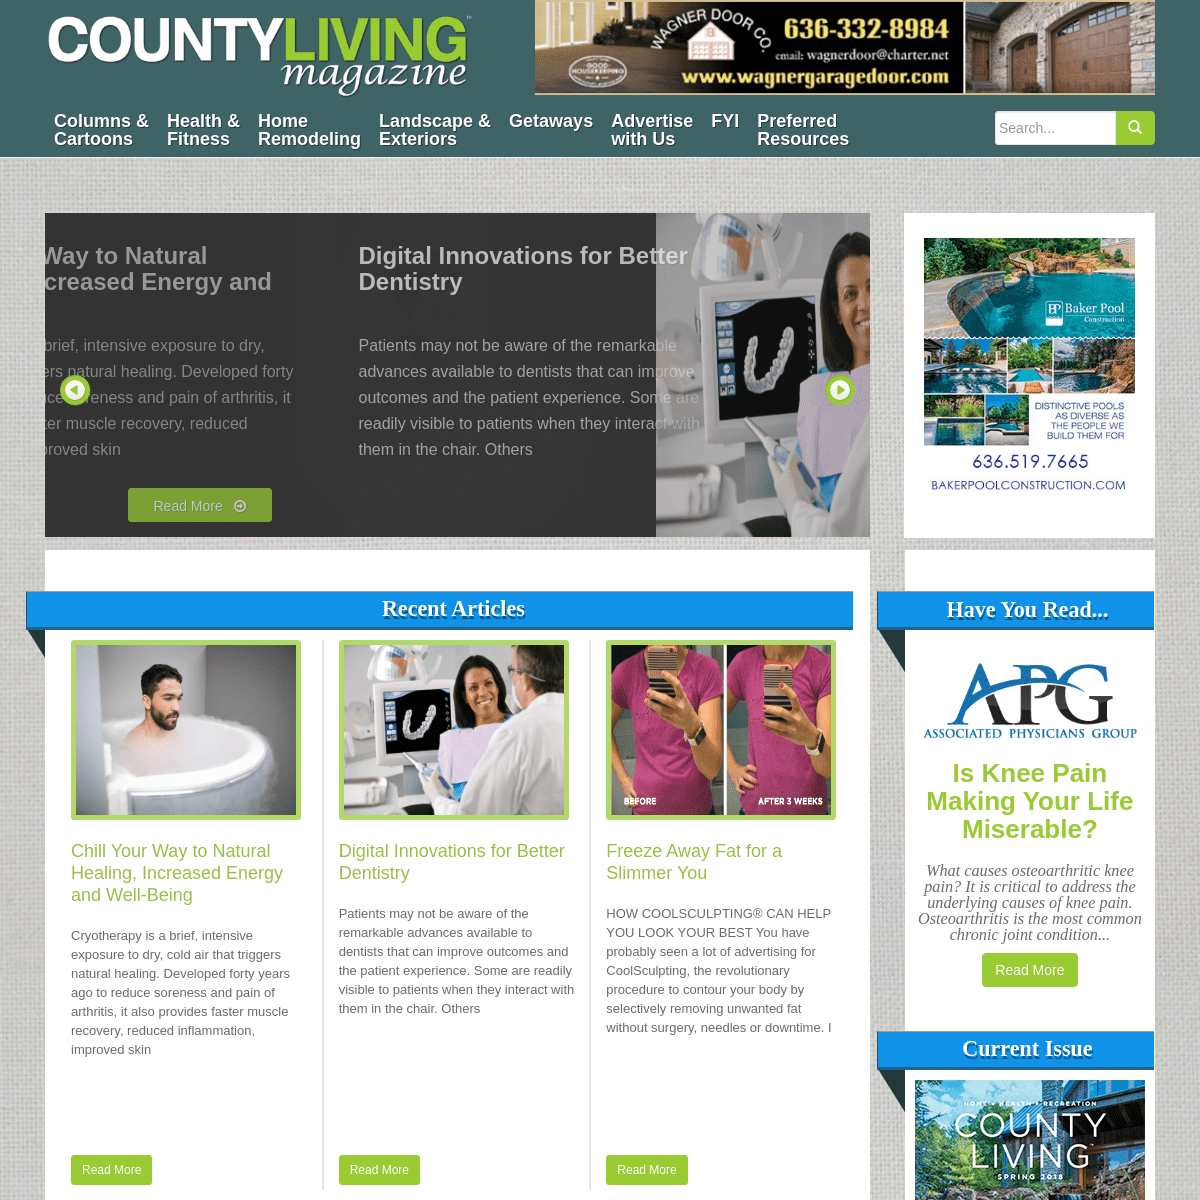 A complete backup of countylivingmag.com